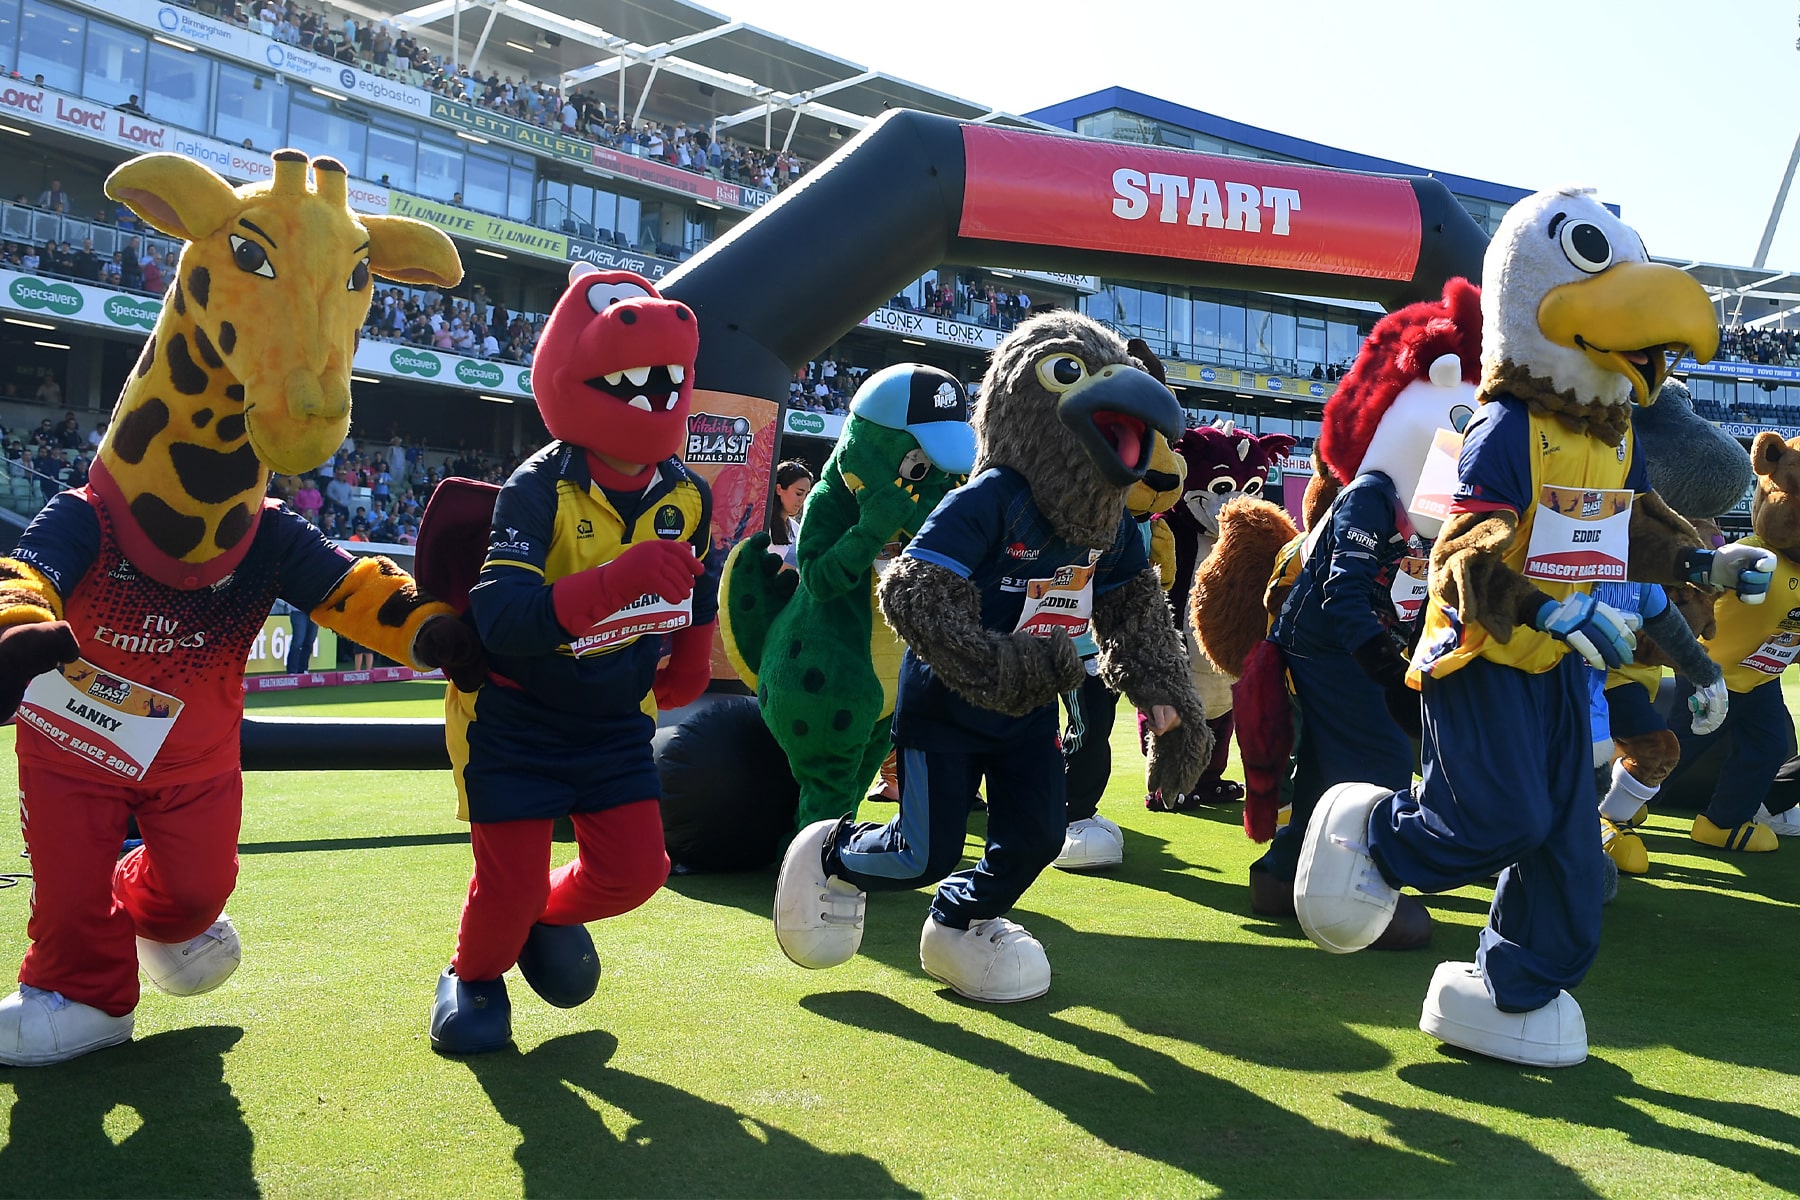 Mascot Race headlines Finals Day in support of Trust